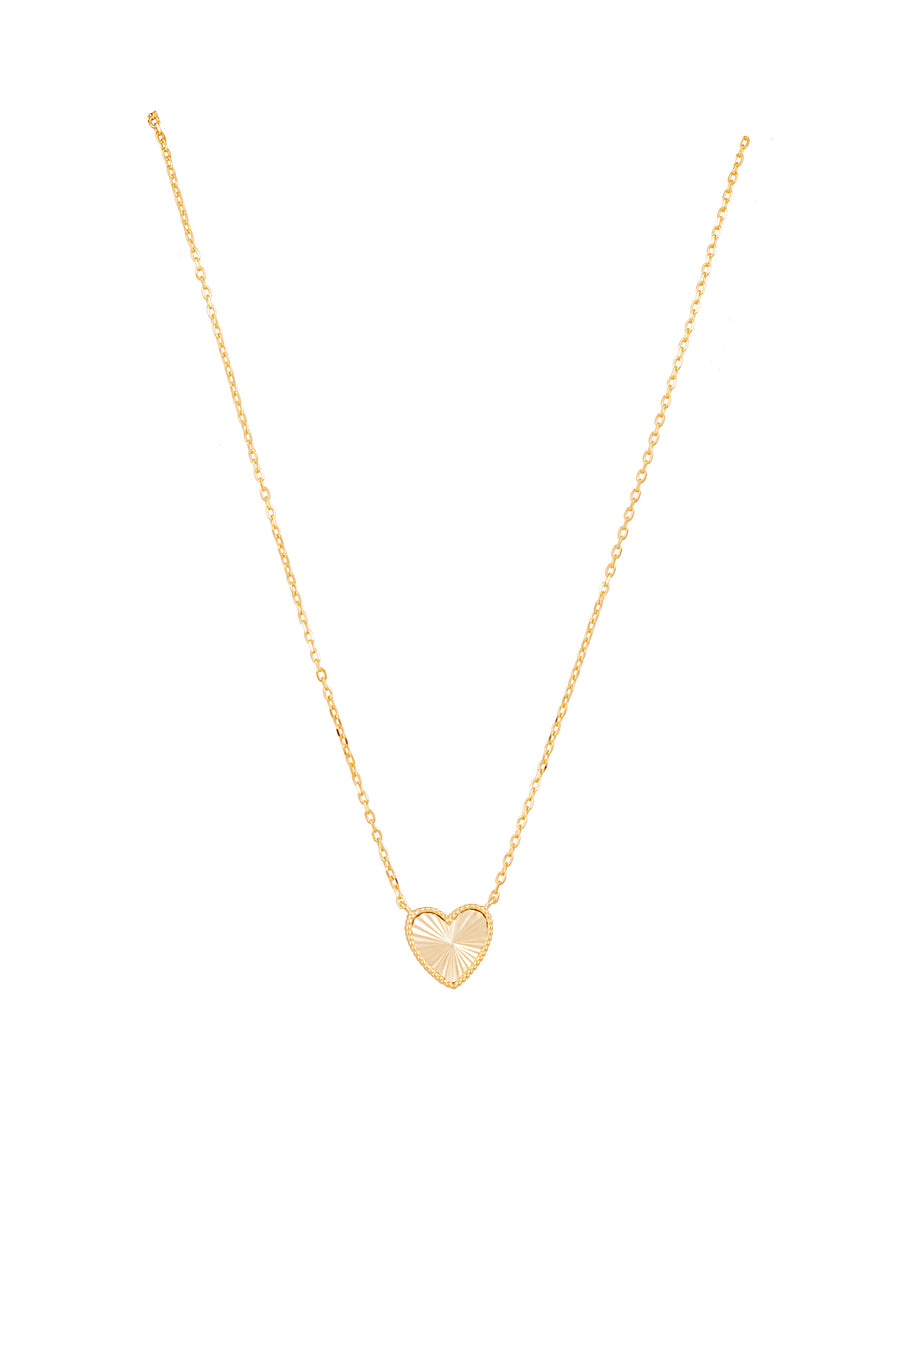 Alessia Heart Necklace - Style No: 8302-0003